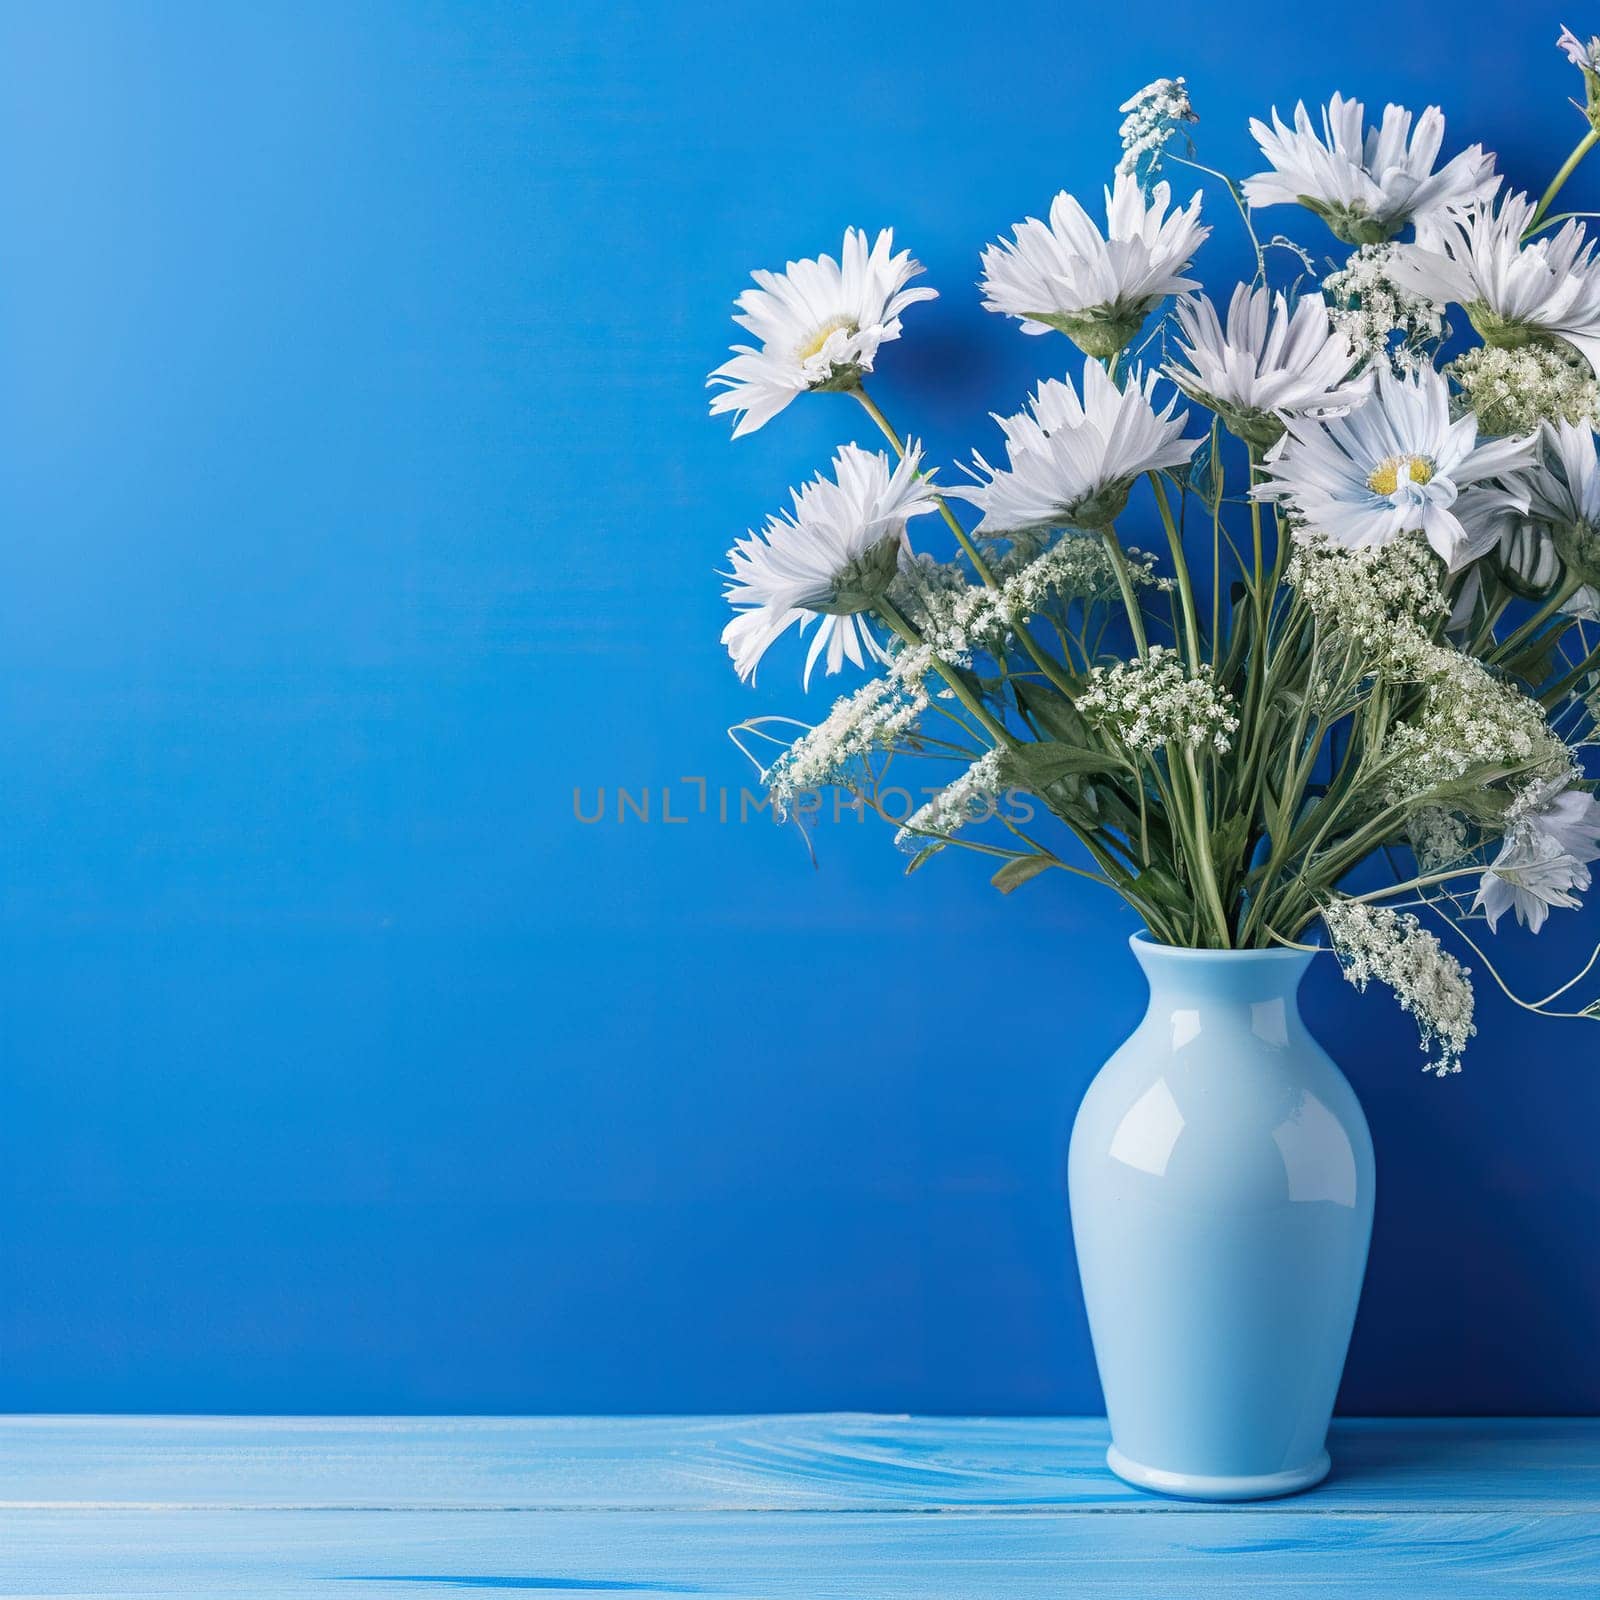 White daisies in a blue vase on a blue background. Generated by artificial intelligence by Vovmar